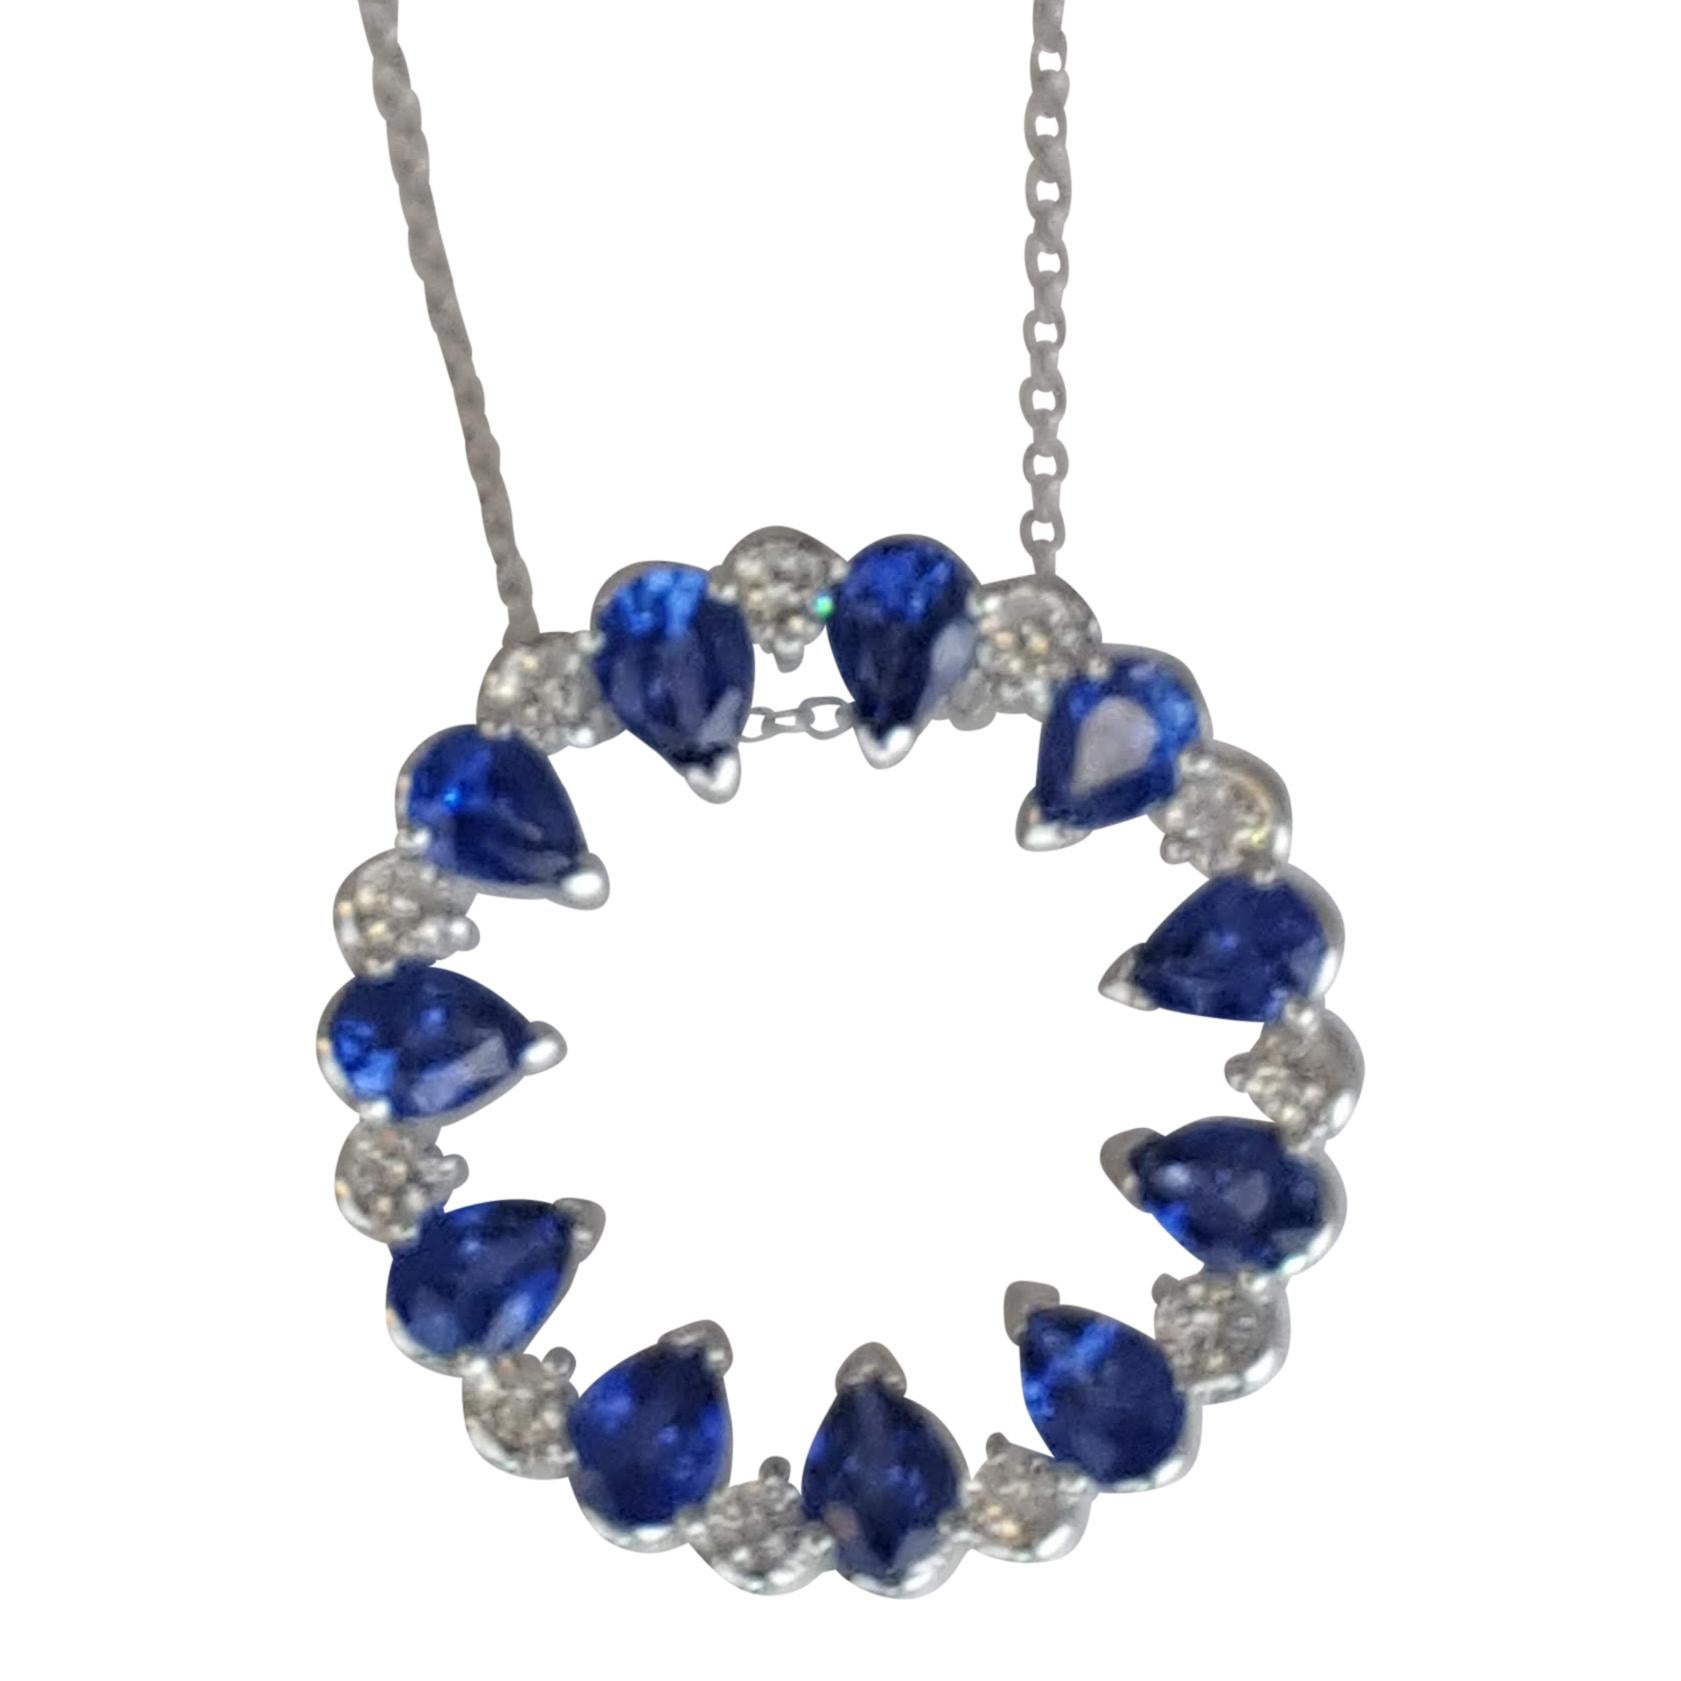 This beautiful sapphire pendant features eleven pear shaped blue sapphires alternating with eleven round white diamonds, to form a round ring. The total sapphire weight is 2.01 carats, and the total diamond weight 0.25 carats.

Set in 18k